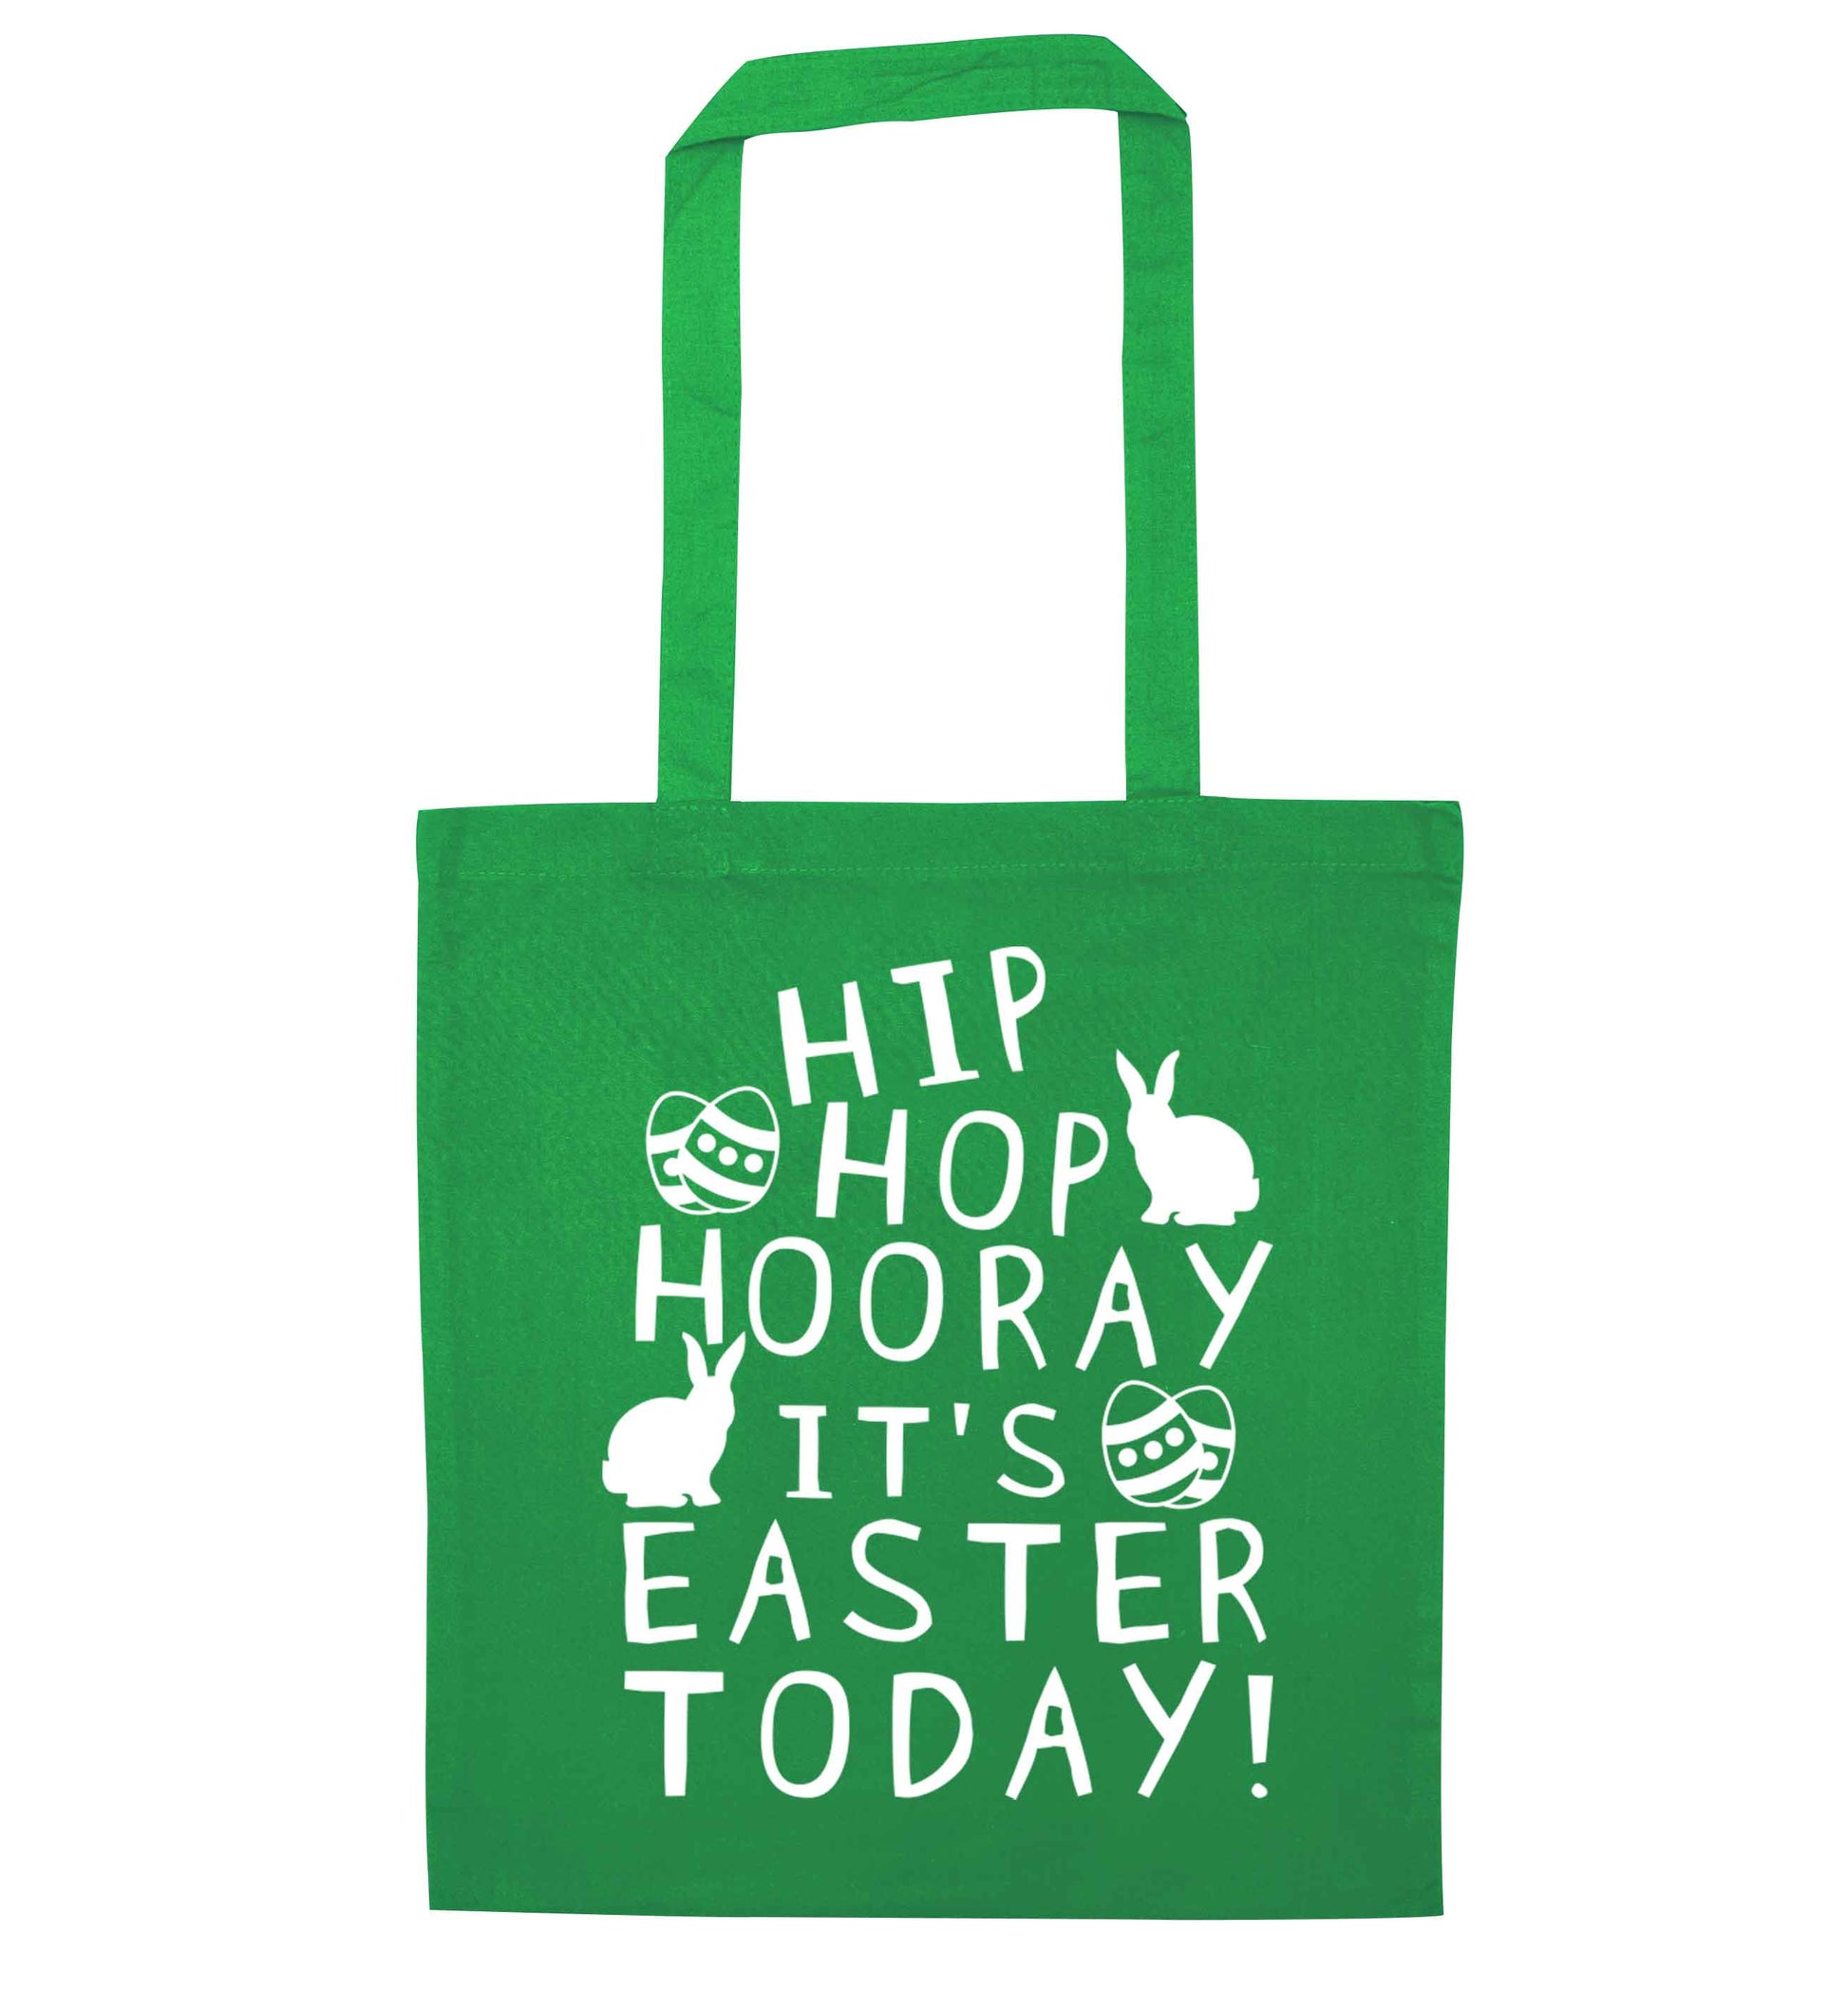 Hip hip hooray it's Easter today! green tote bag